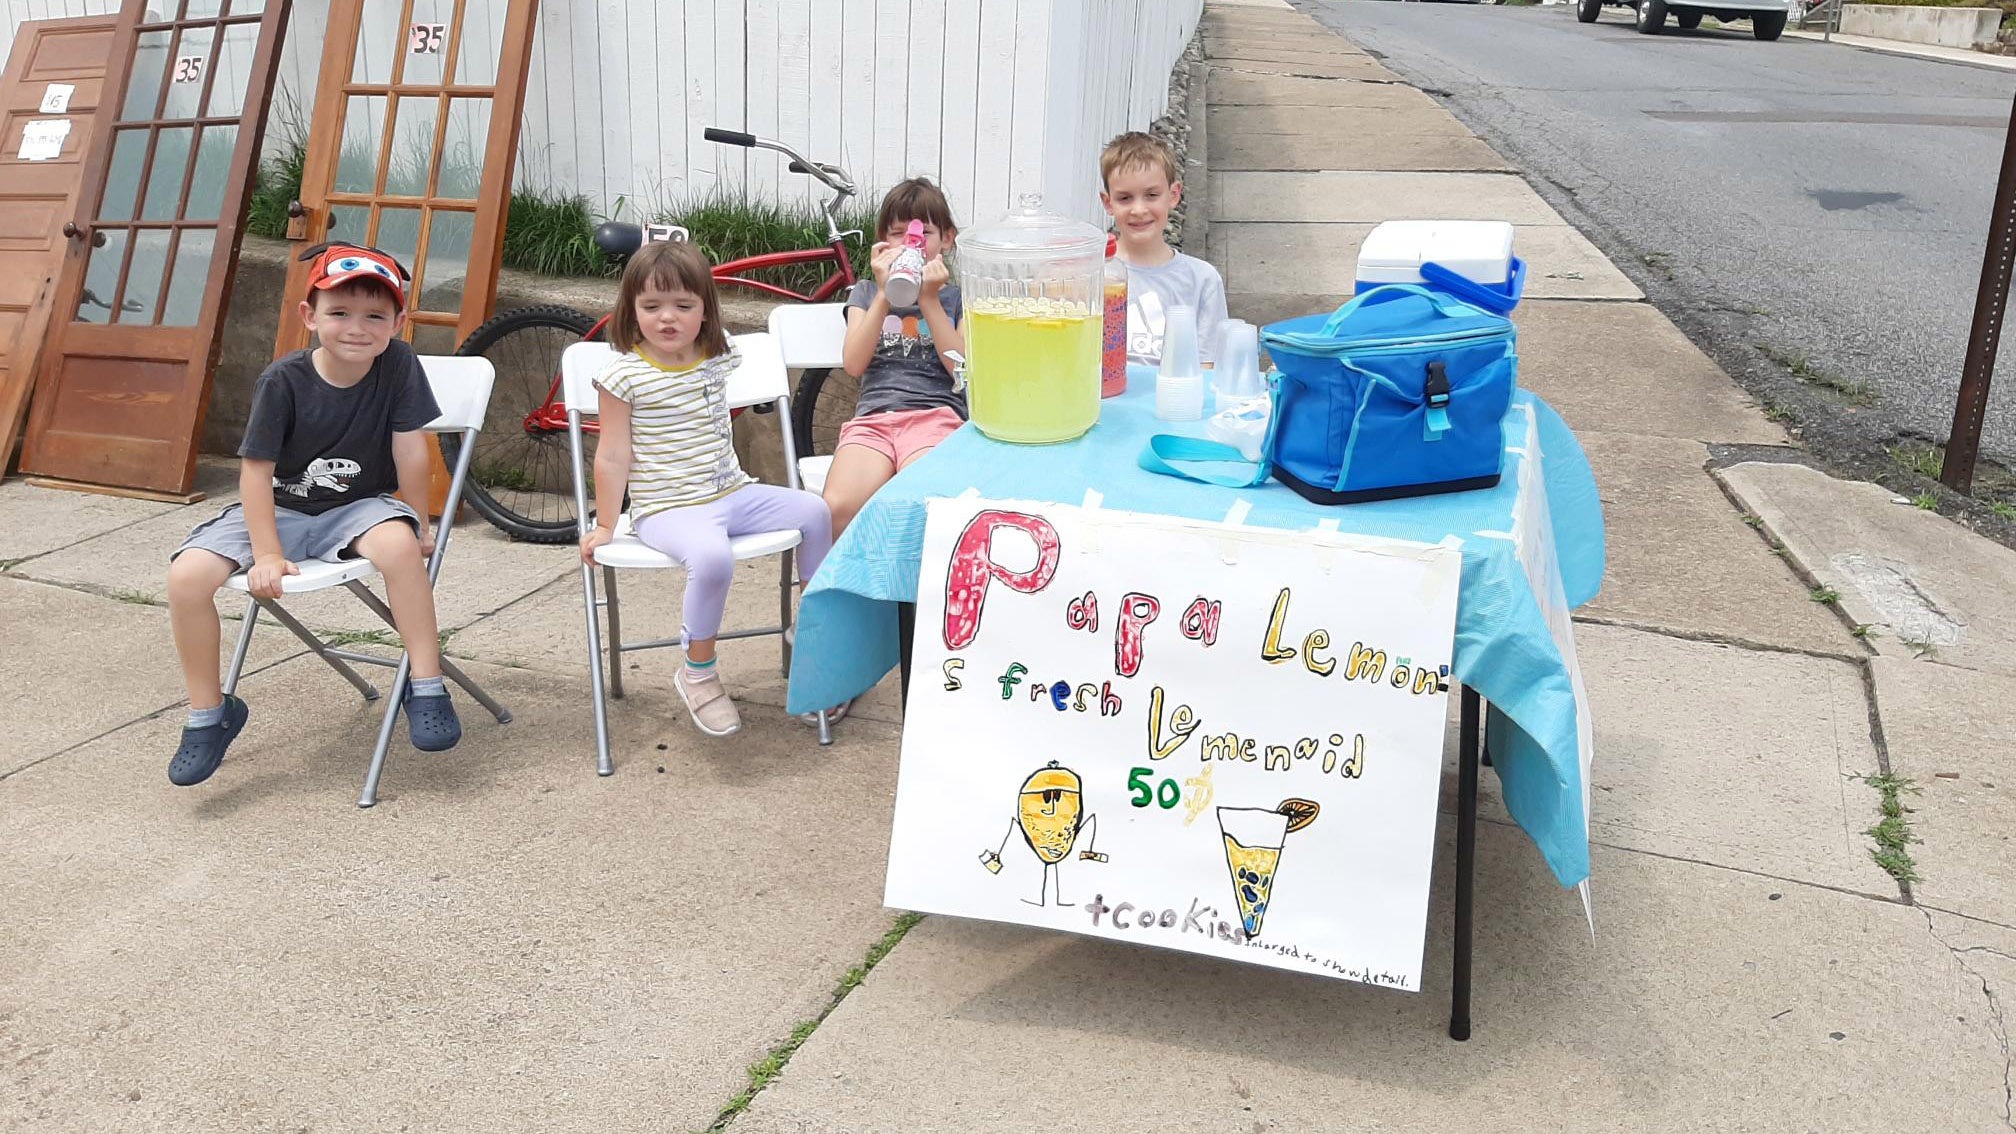 8-year-old holds lemonade stand to raise money for a real-life fire truck for his community